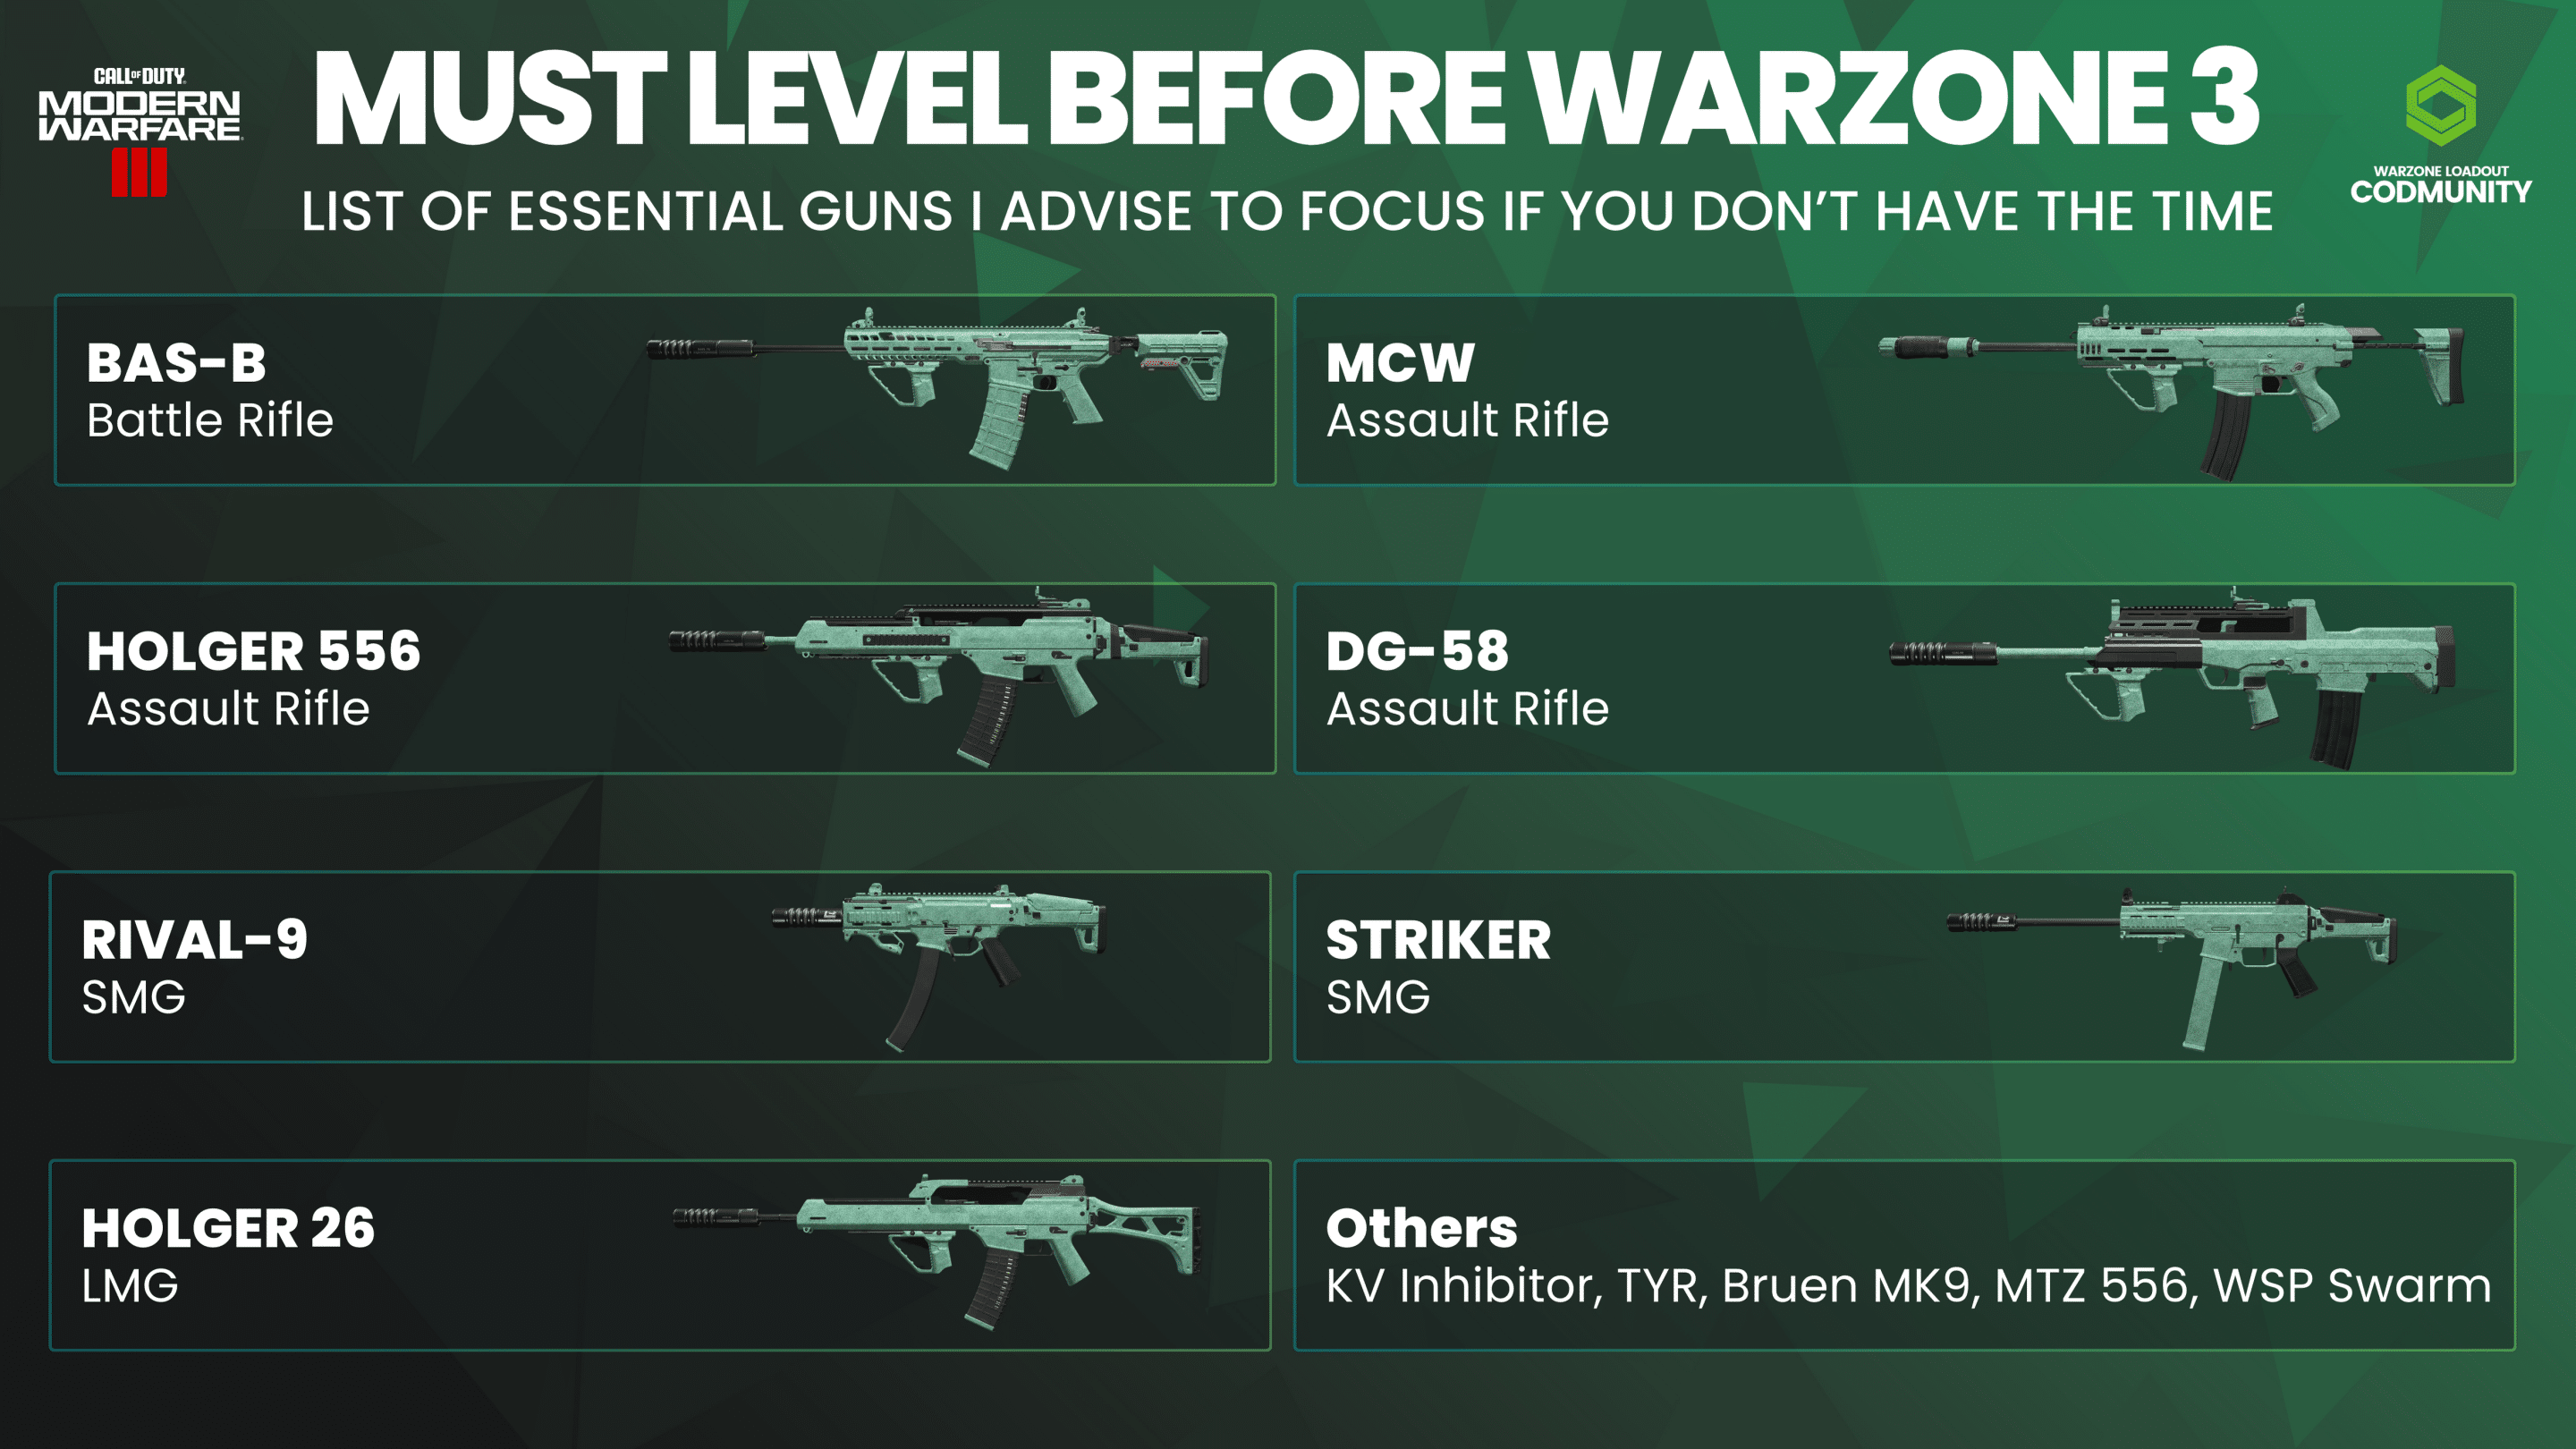 The must-level MW3 weapons before Warzone 3 is here - Essential Weapons and Loadouts